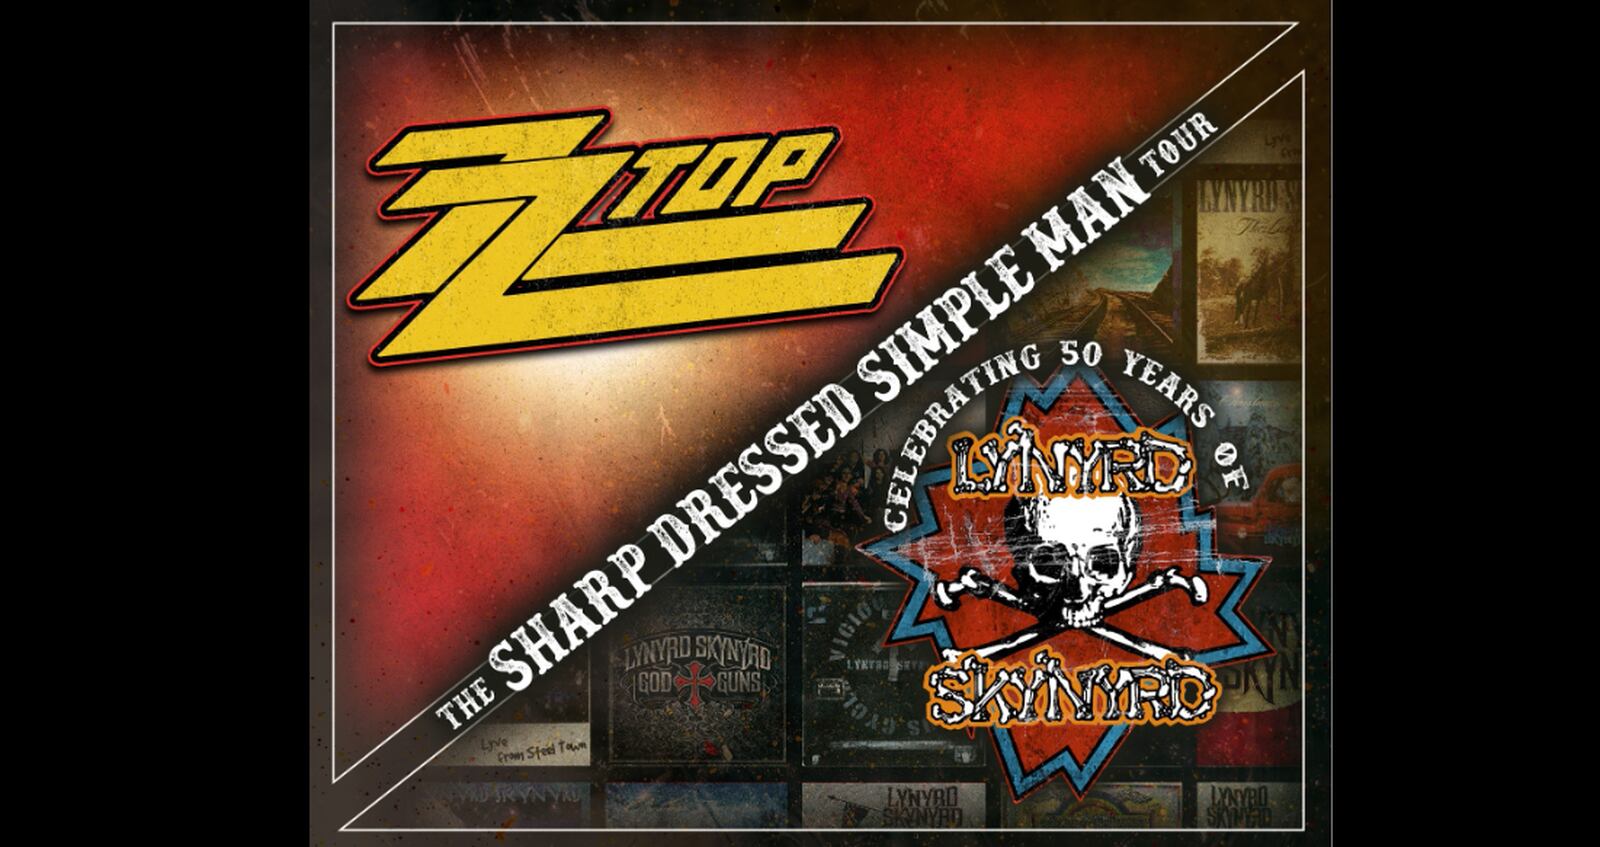 ZZ Top And Lynyrd Skynyrd Announce “Sharp Dressed/Simple Man” Tour For